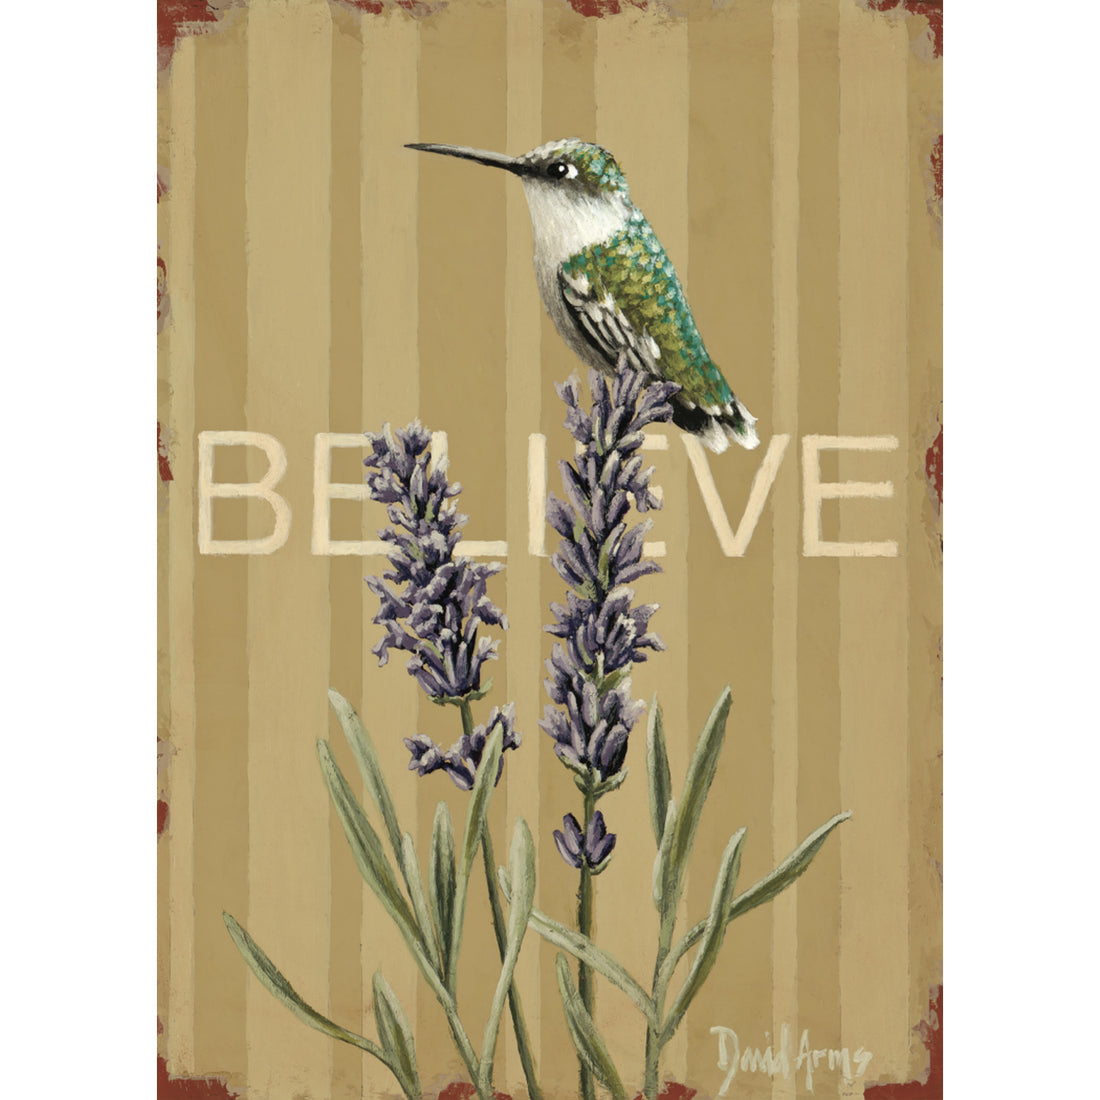 An illustration featuring a green and white hummingbird sitting on lavender flowers over a striped tan background, with &quot;BELIEVE&quot; printed in light tan behind the flowers.